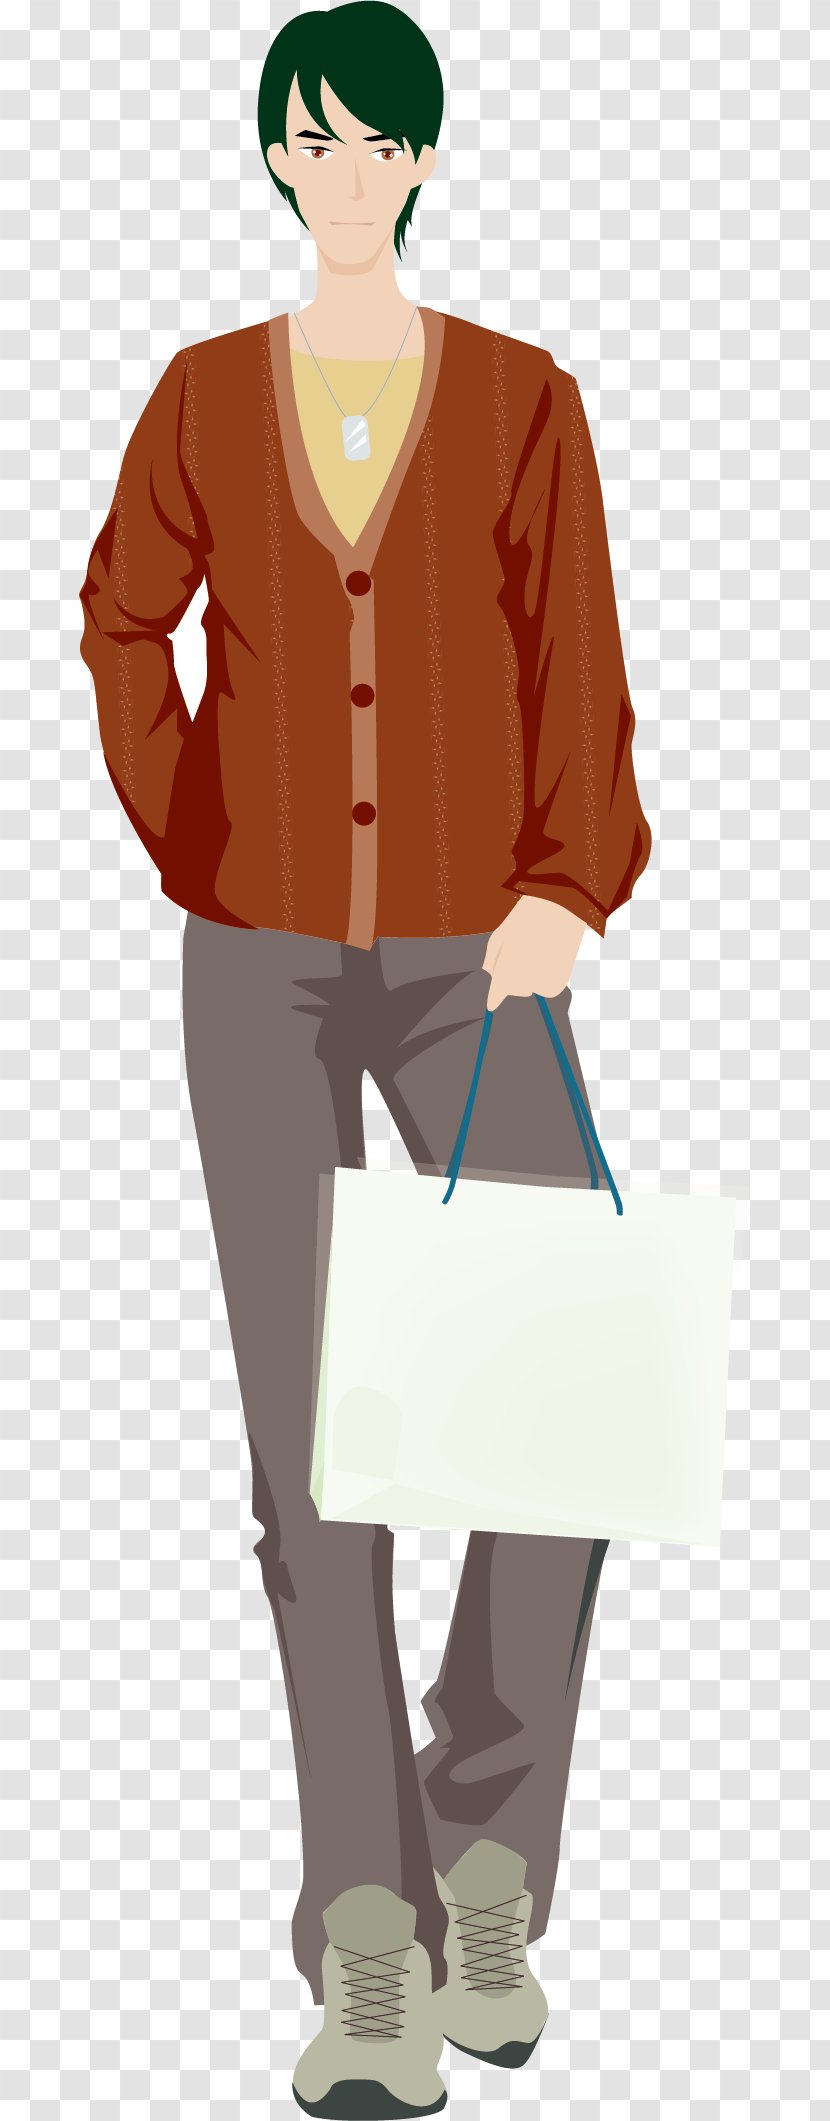 Cartoon Illustration - Male - Young Man Transparent PNG